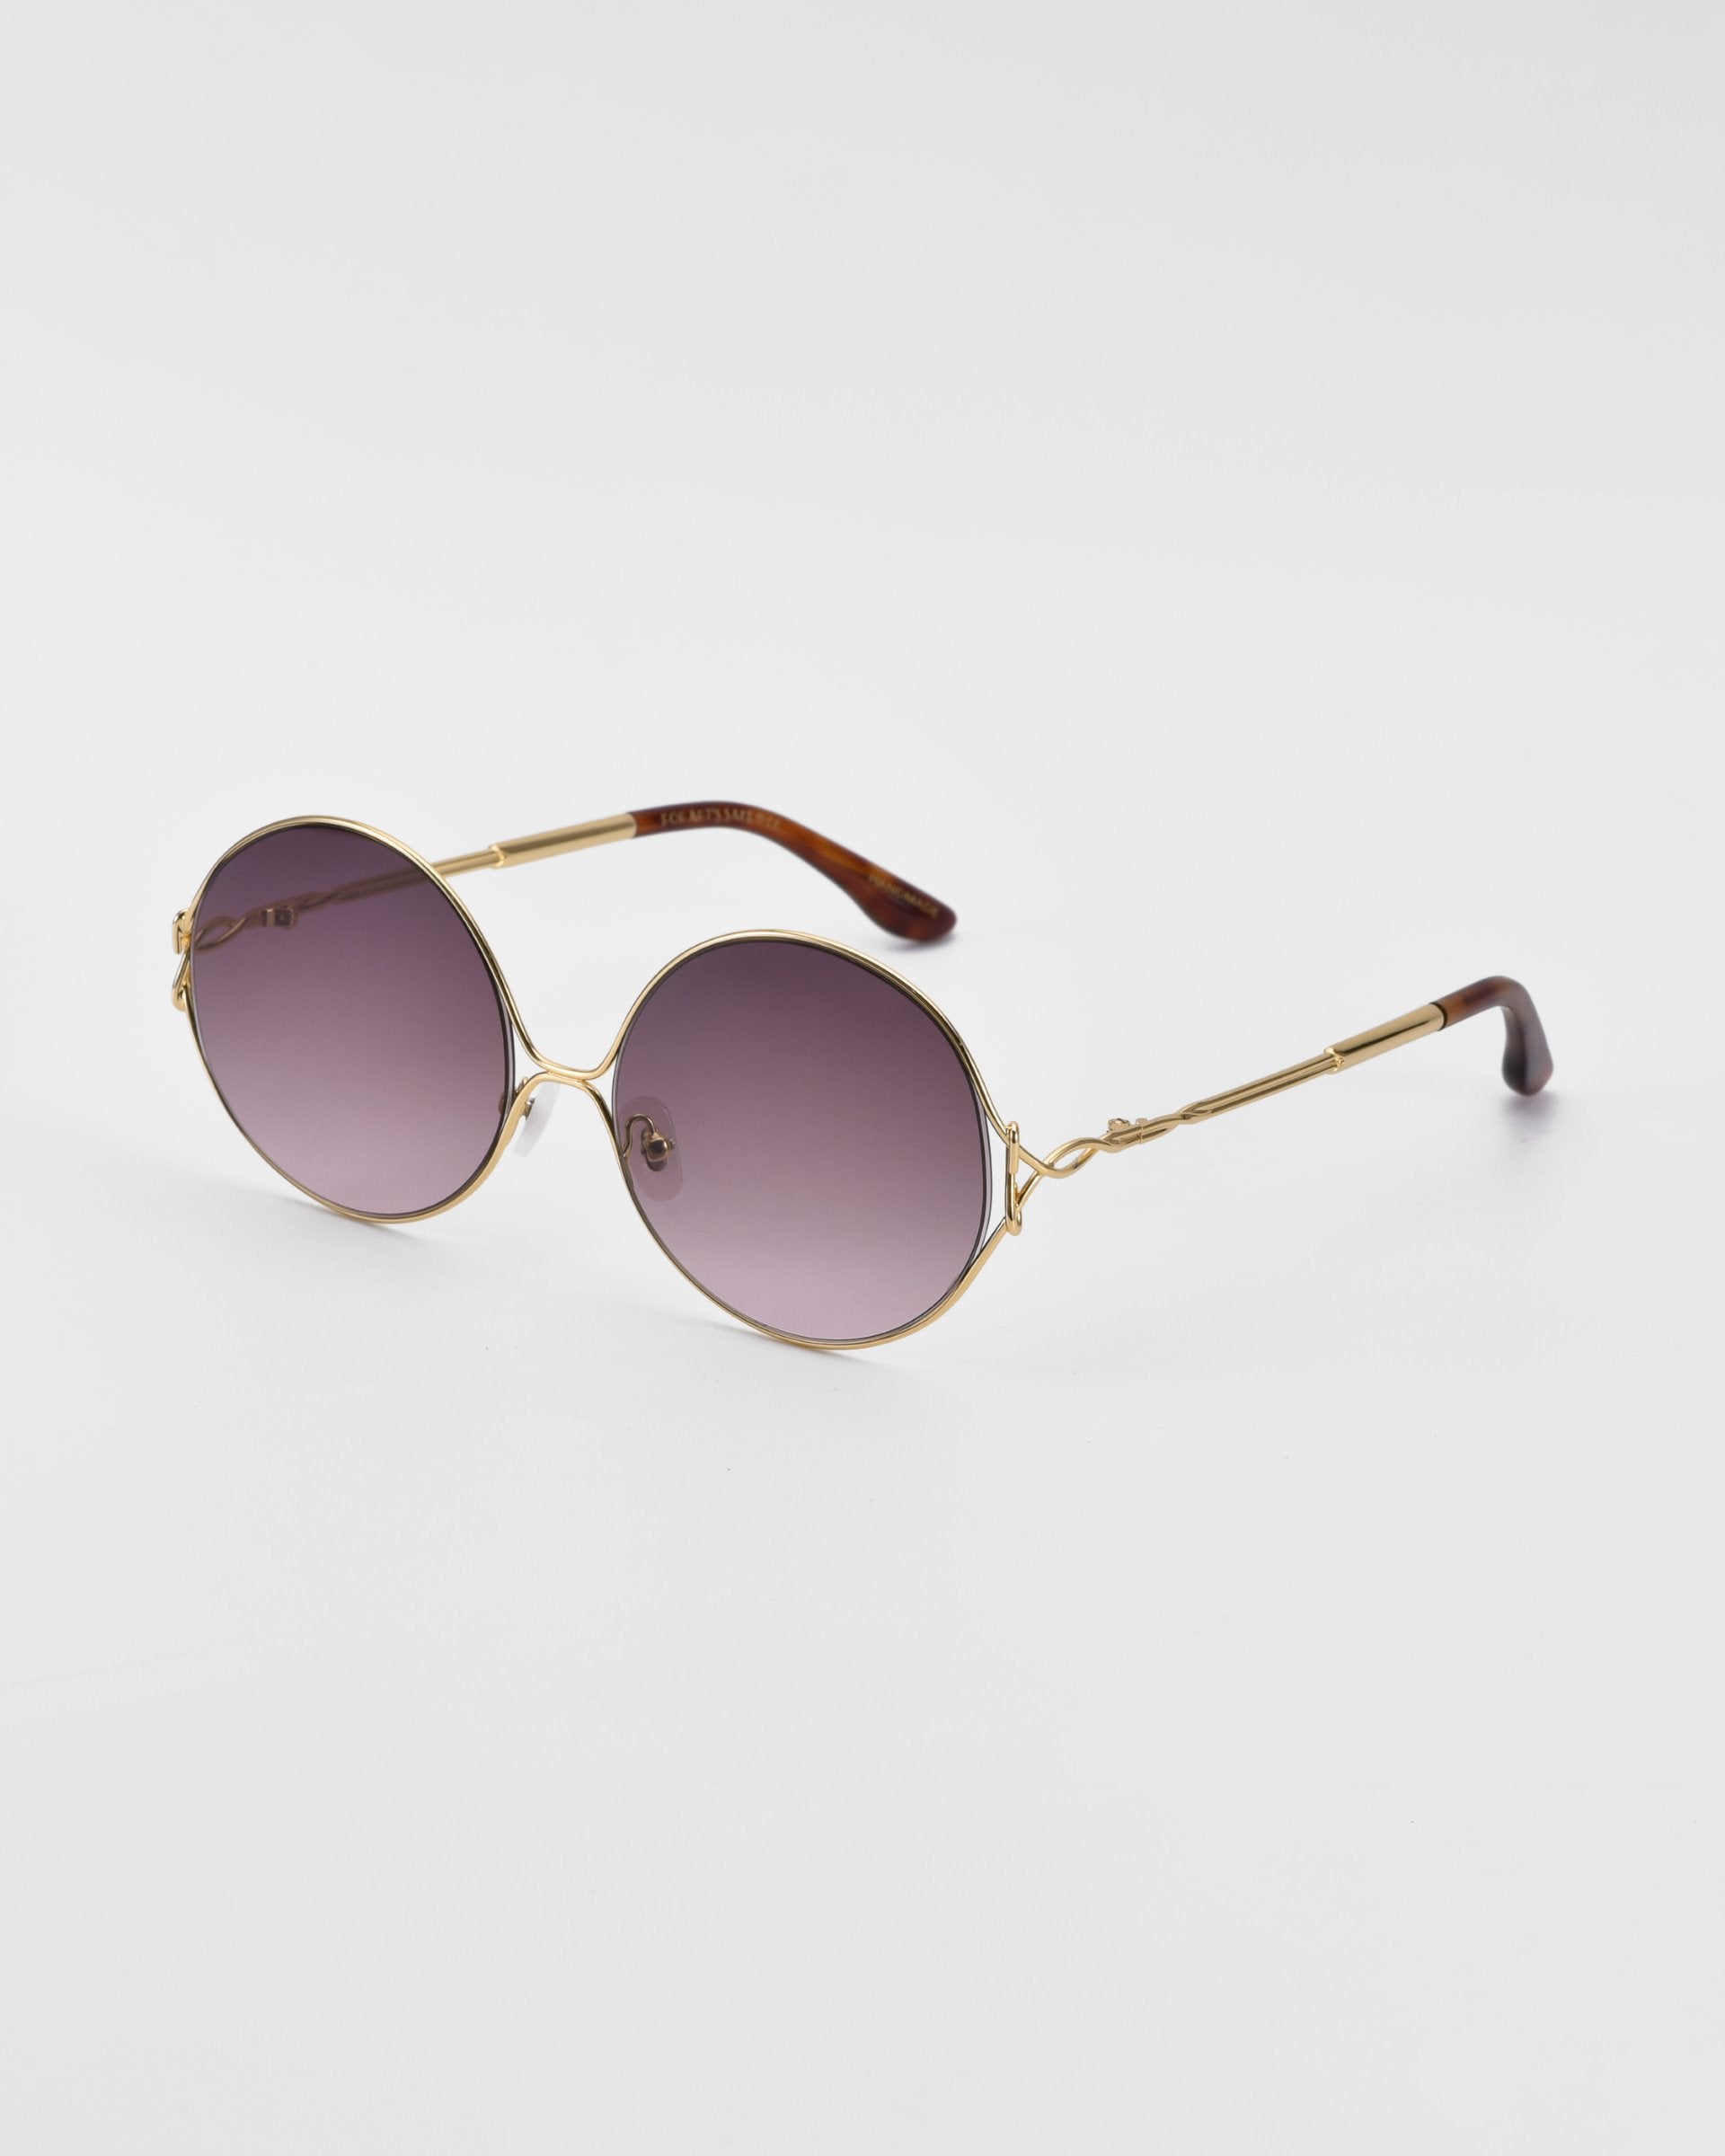 A pair of retro-inspired sunglasses with oversized round frames and a gold metal finish, featuring brown-tinted gradient lenses and tortoiseshell temples. The Aura by For Art&#39;s Sake® is positioned at an angle on a seamless white background.